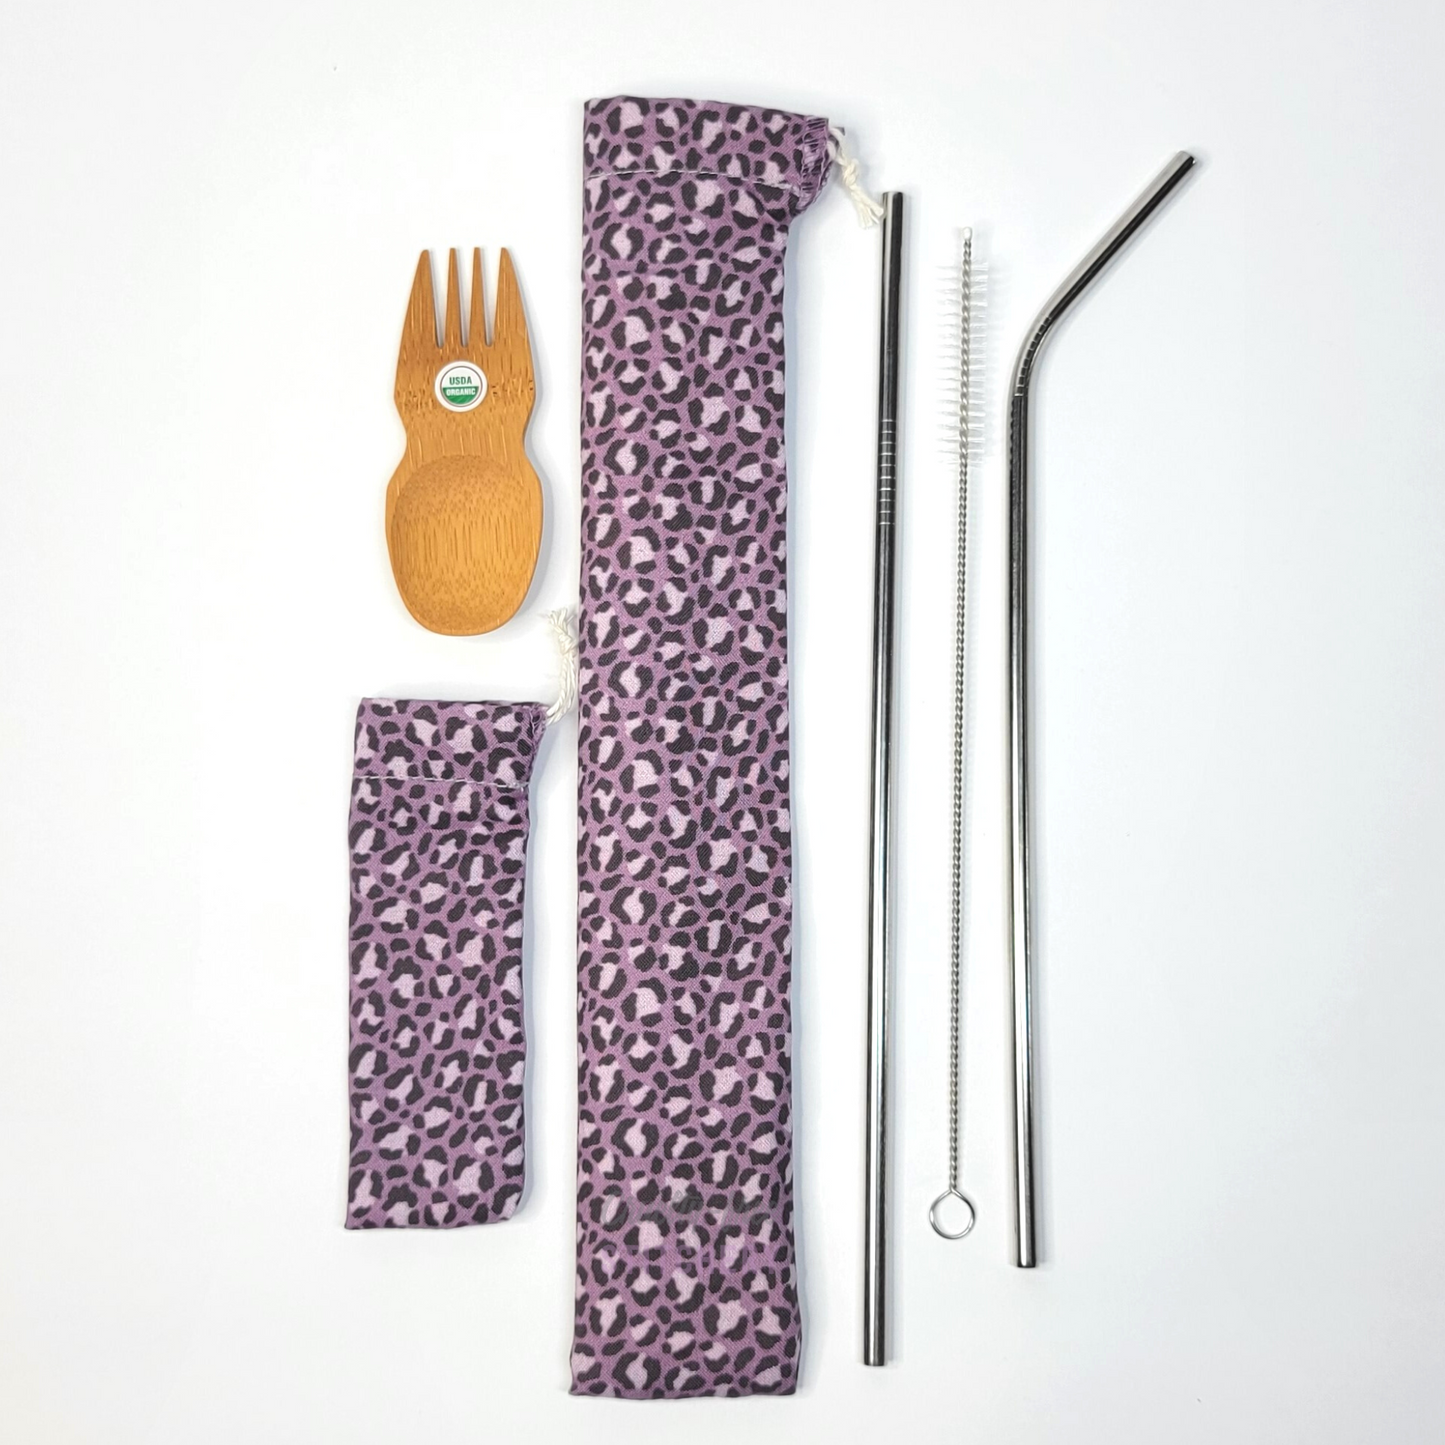 The contents of this bundle. A bamboo spork, violet leopard print spork pouch, violet leopard print straw pouch, and stainless steel straw set.